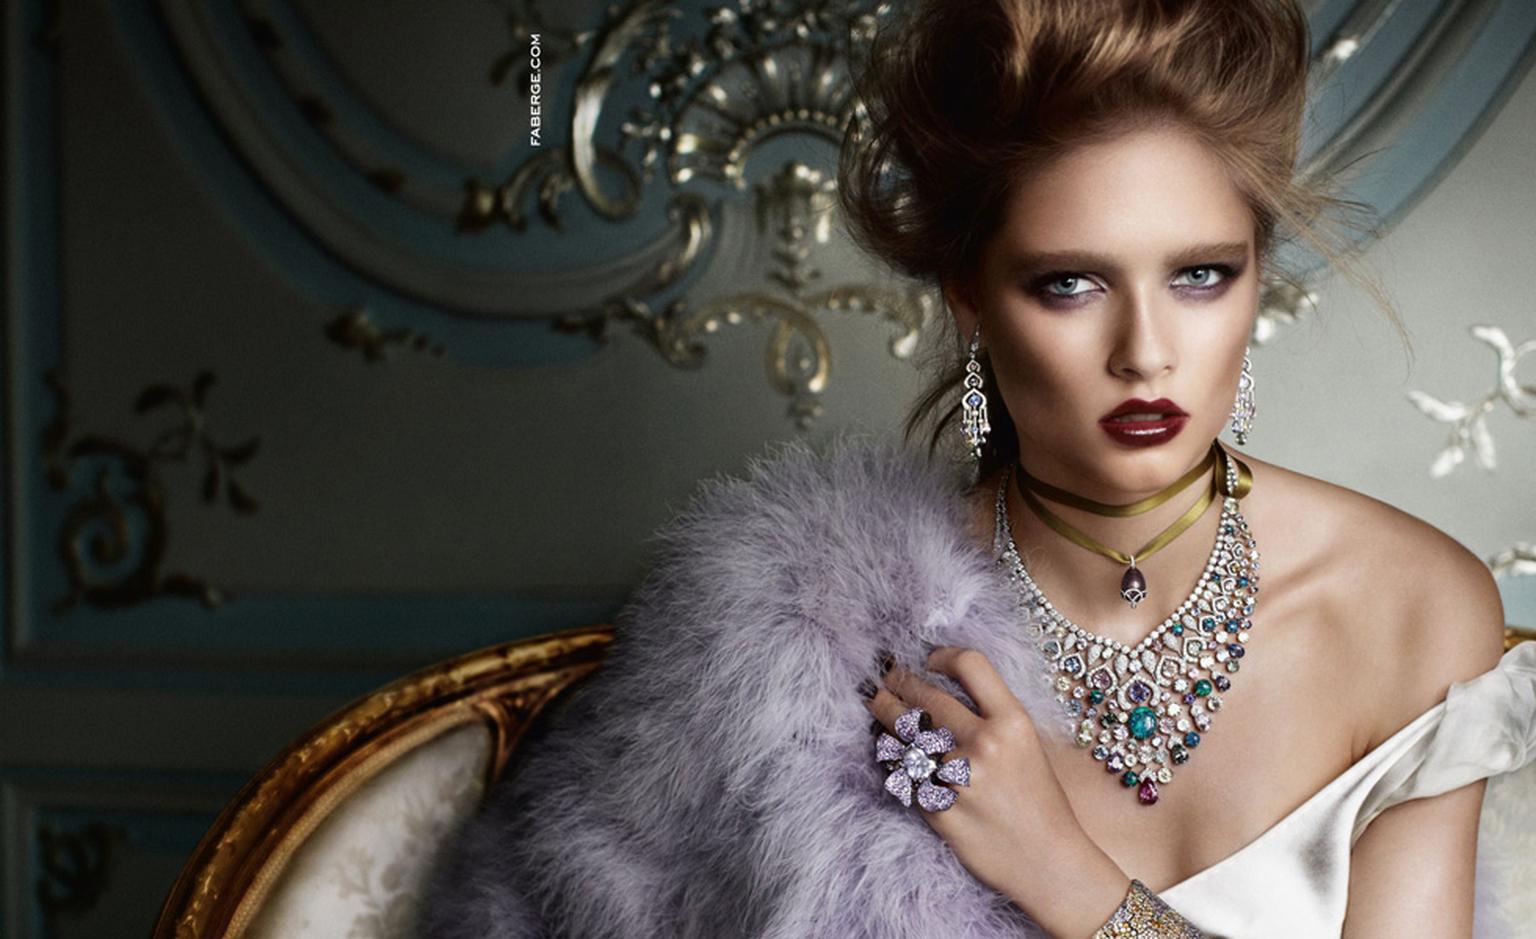 Fabergé's new advertising campaign photographed by Mario Testino.